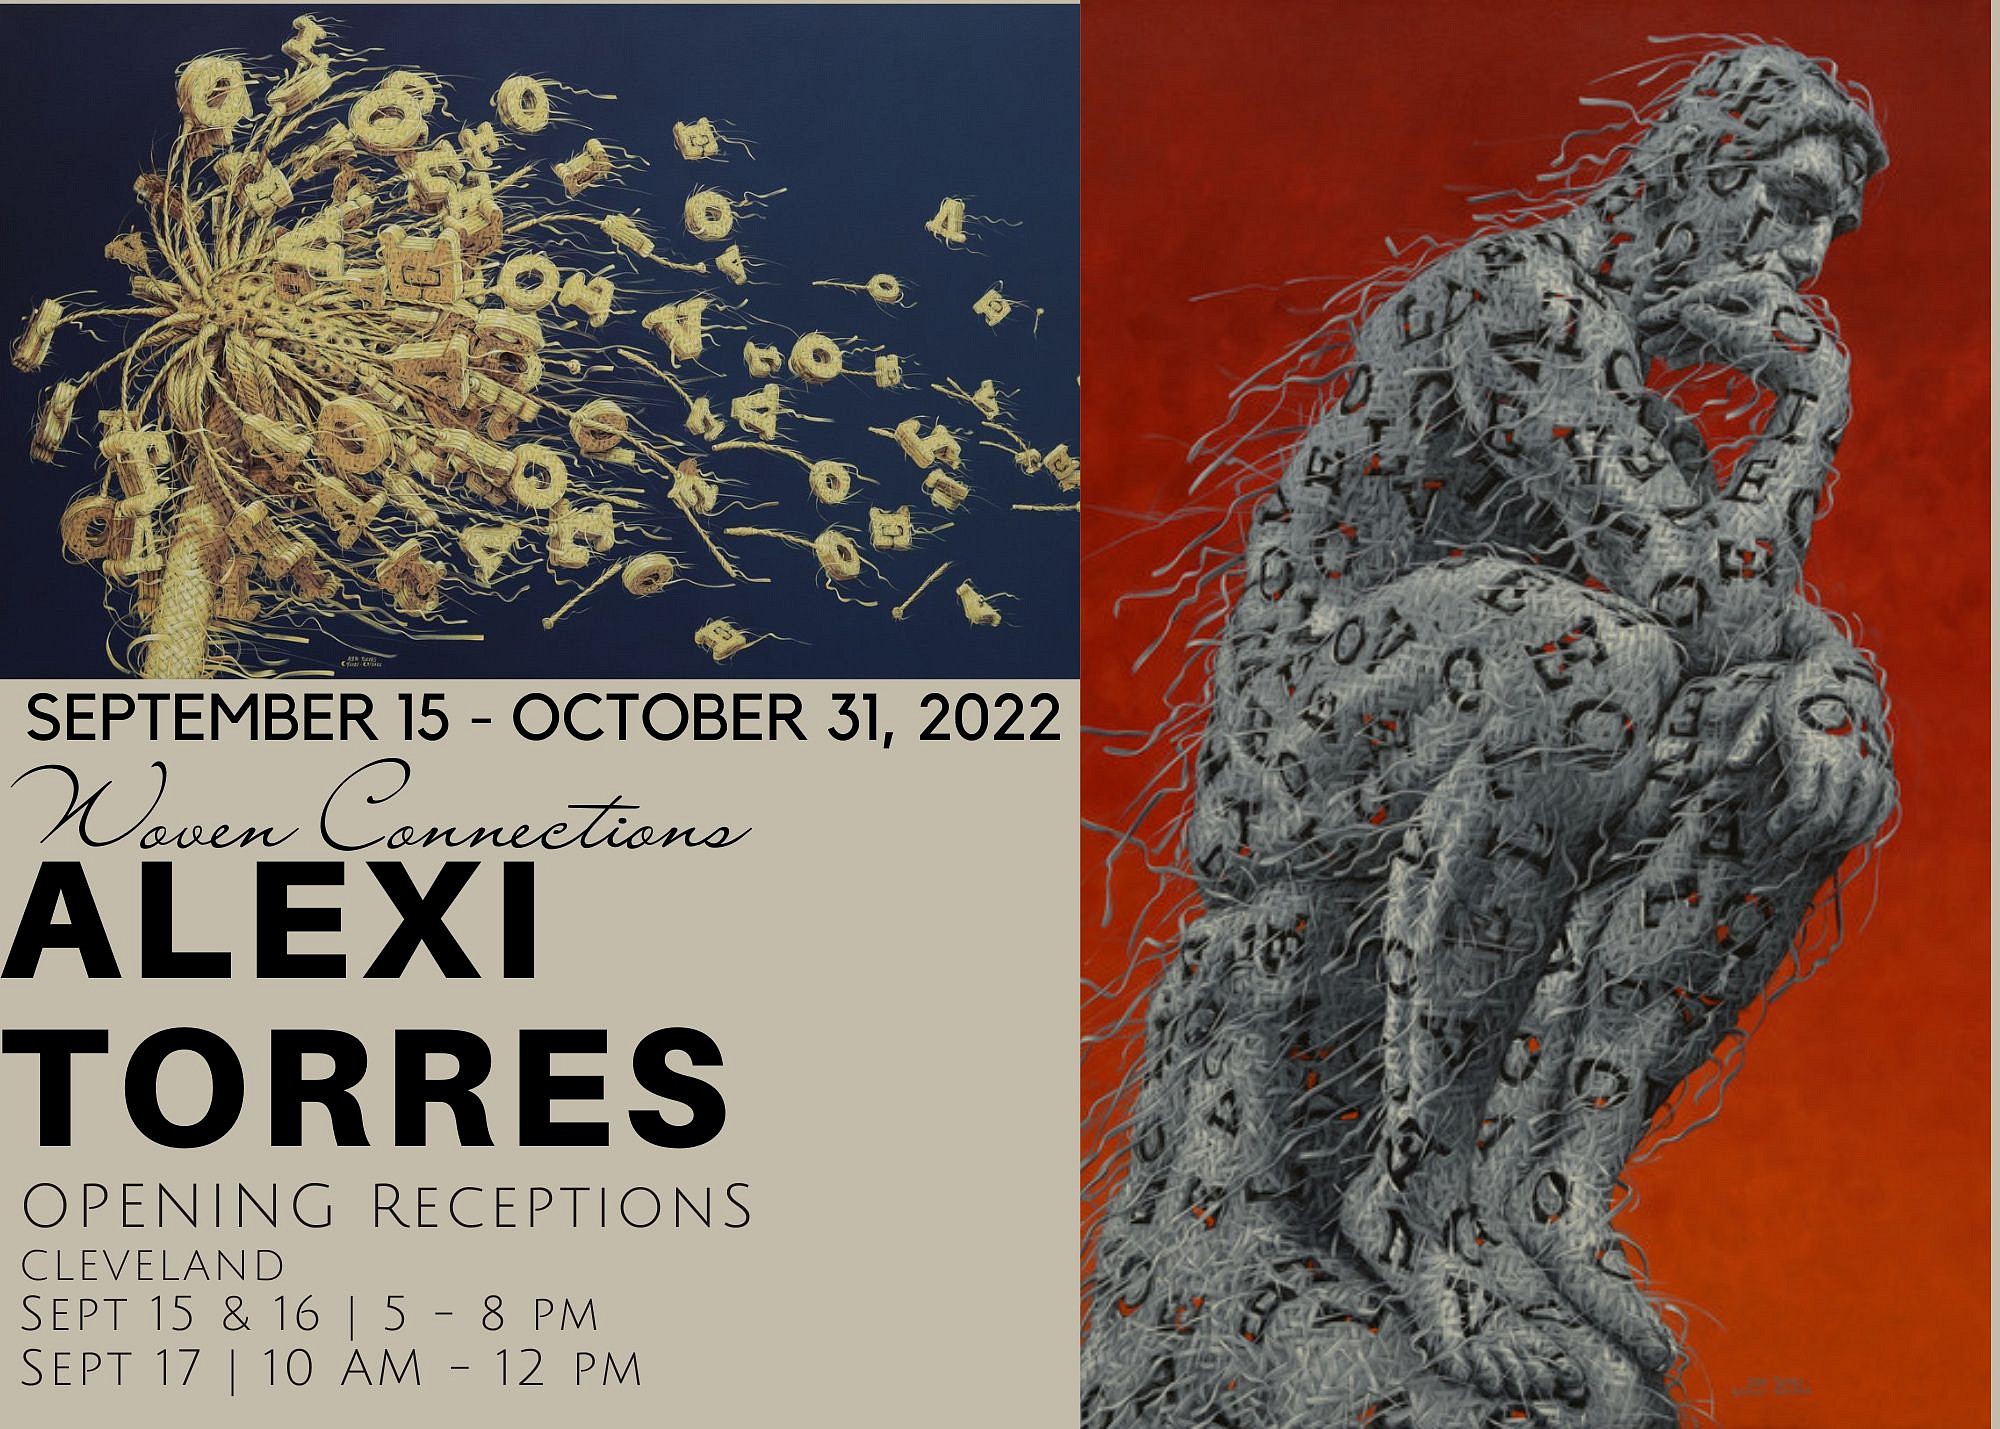 PRESS RELEASE: ALEXI TORRES: Woven Connections | SEPTEMBER 15 - OCTOBER 31, 2022, Sep 15 - Oct 31, 2022